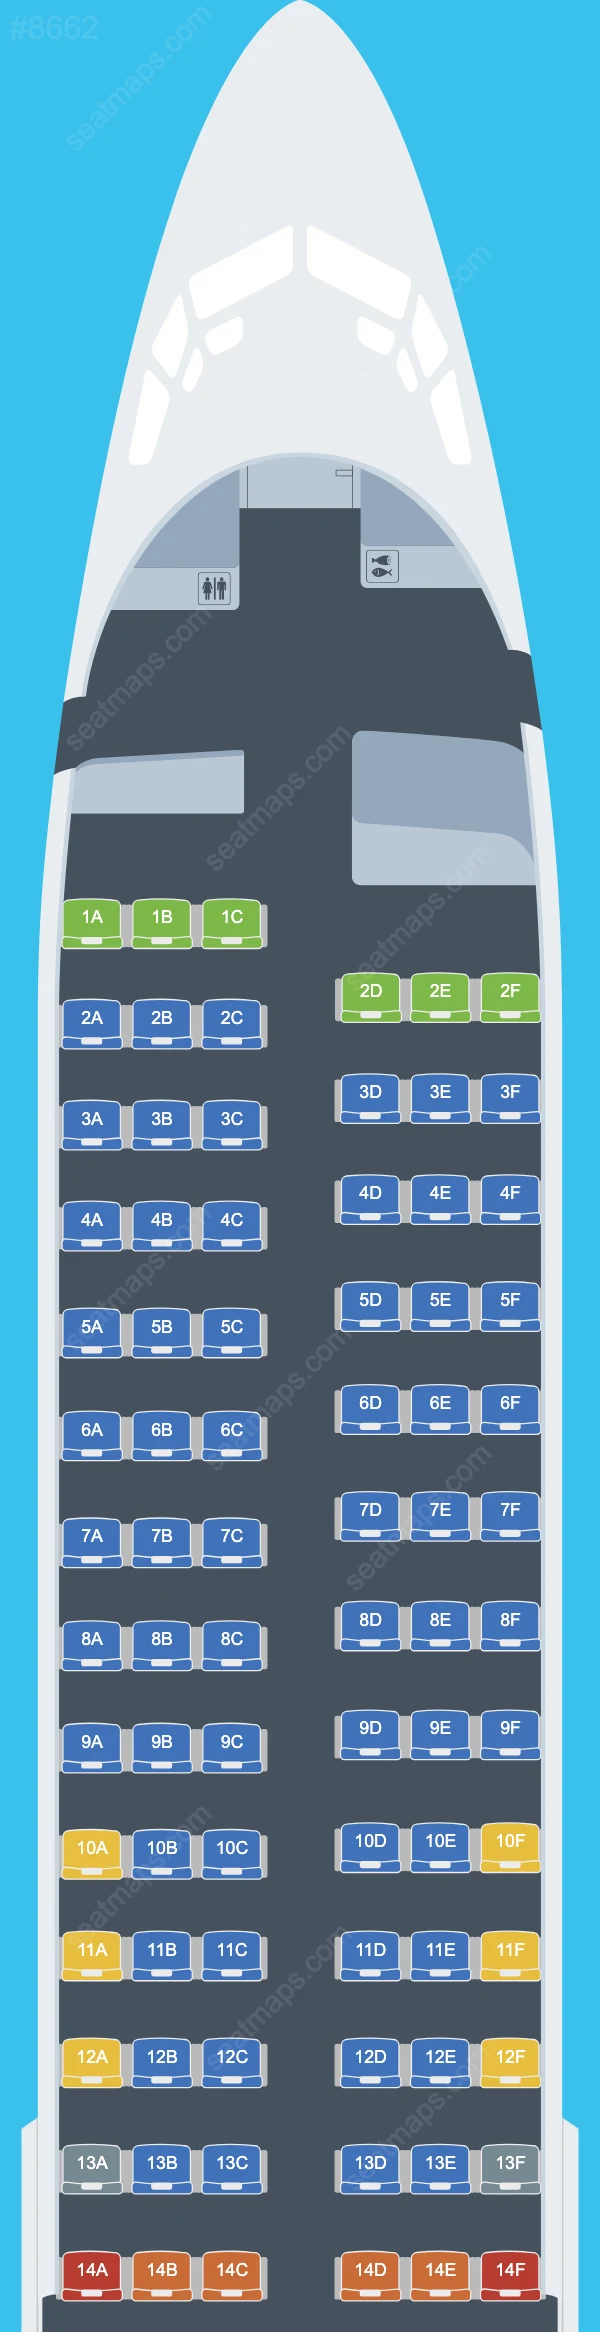 SkyUp Airlines Boeing 737 Seat Maps 737-800 V.1